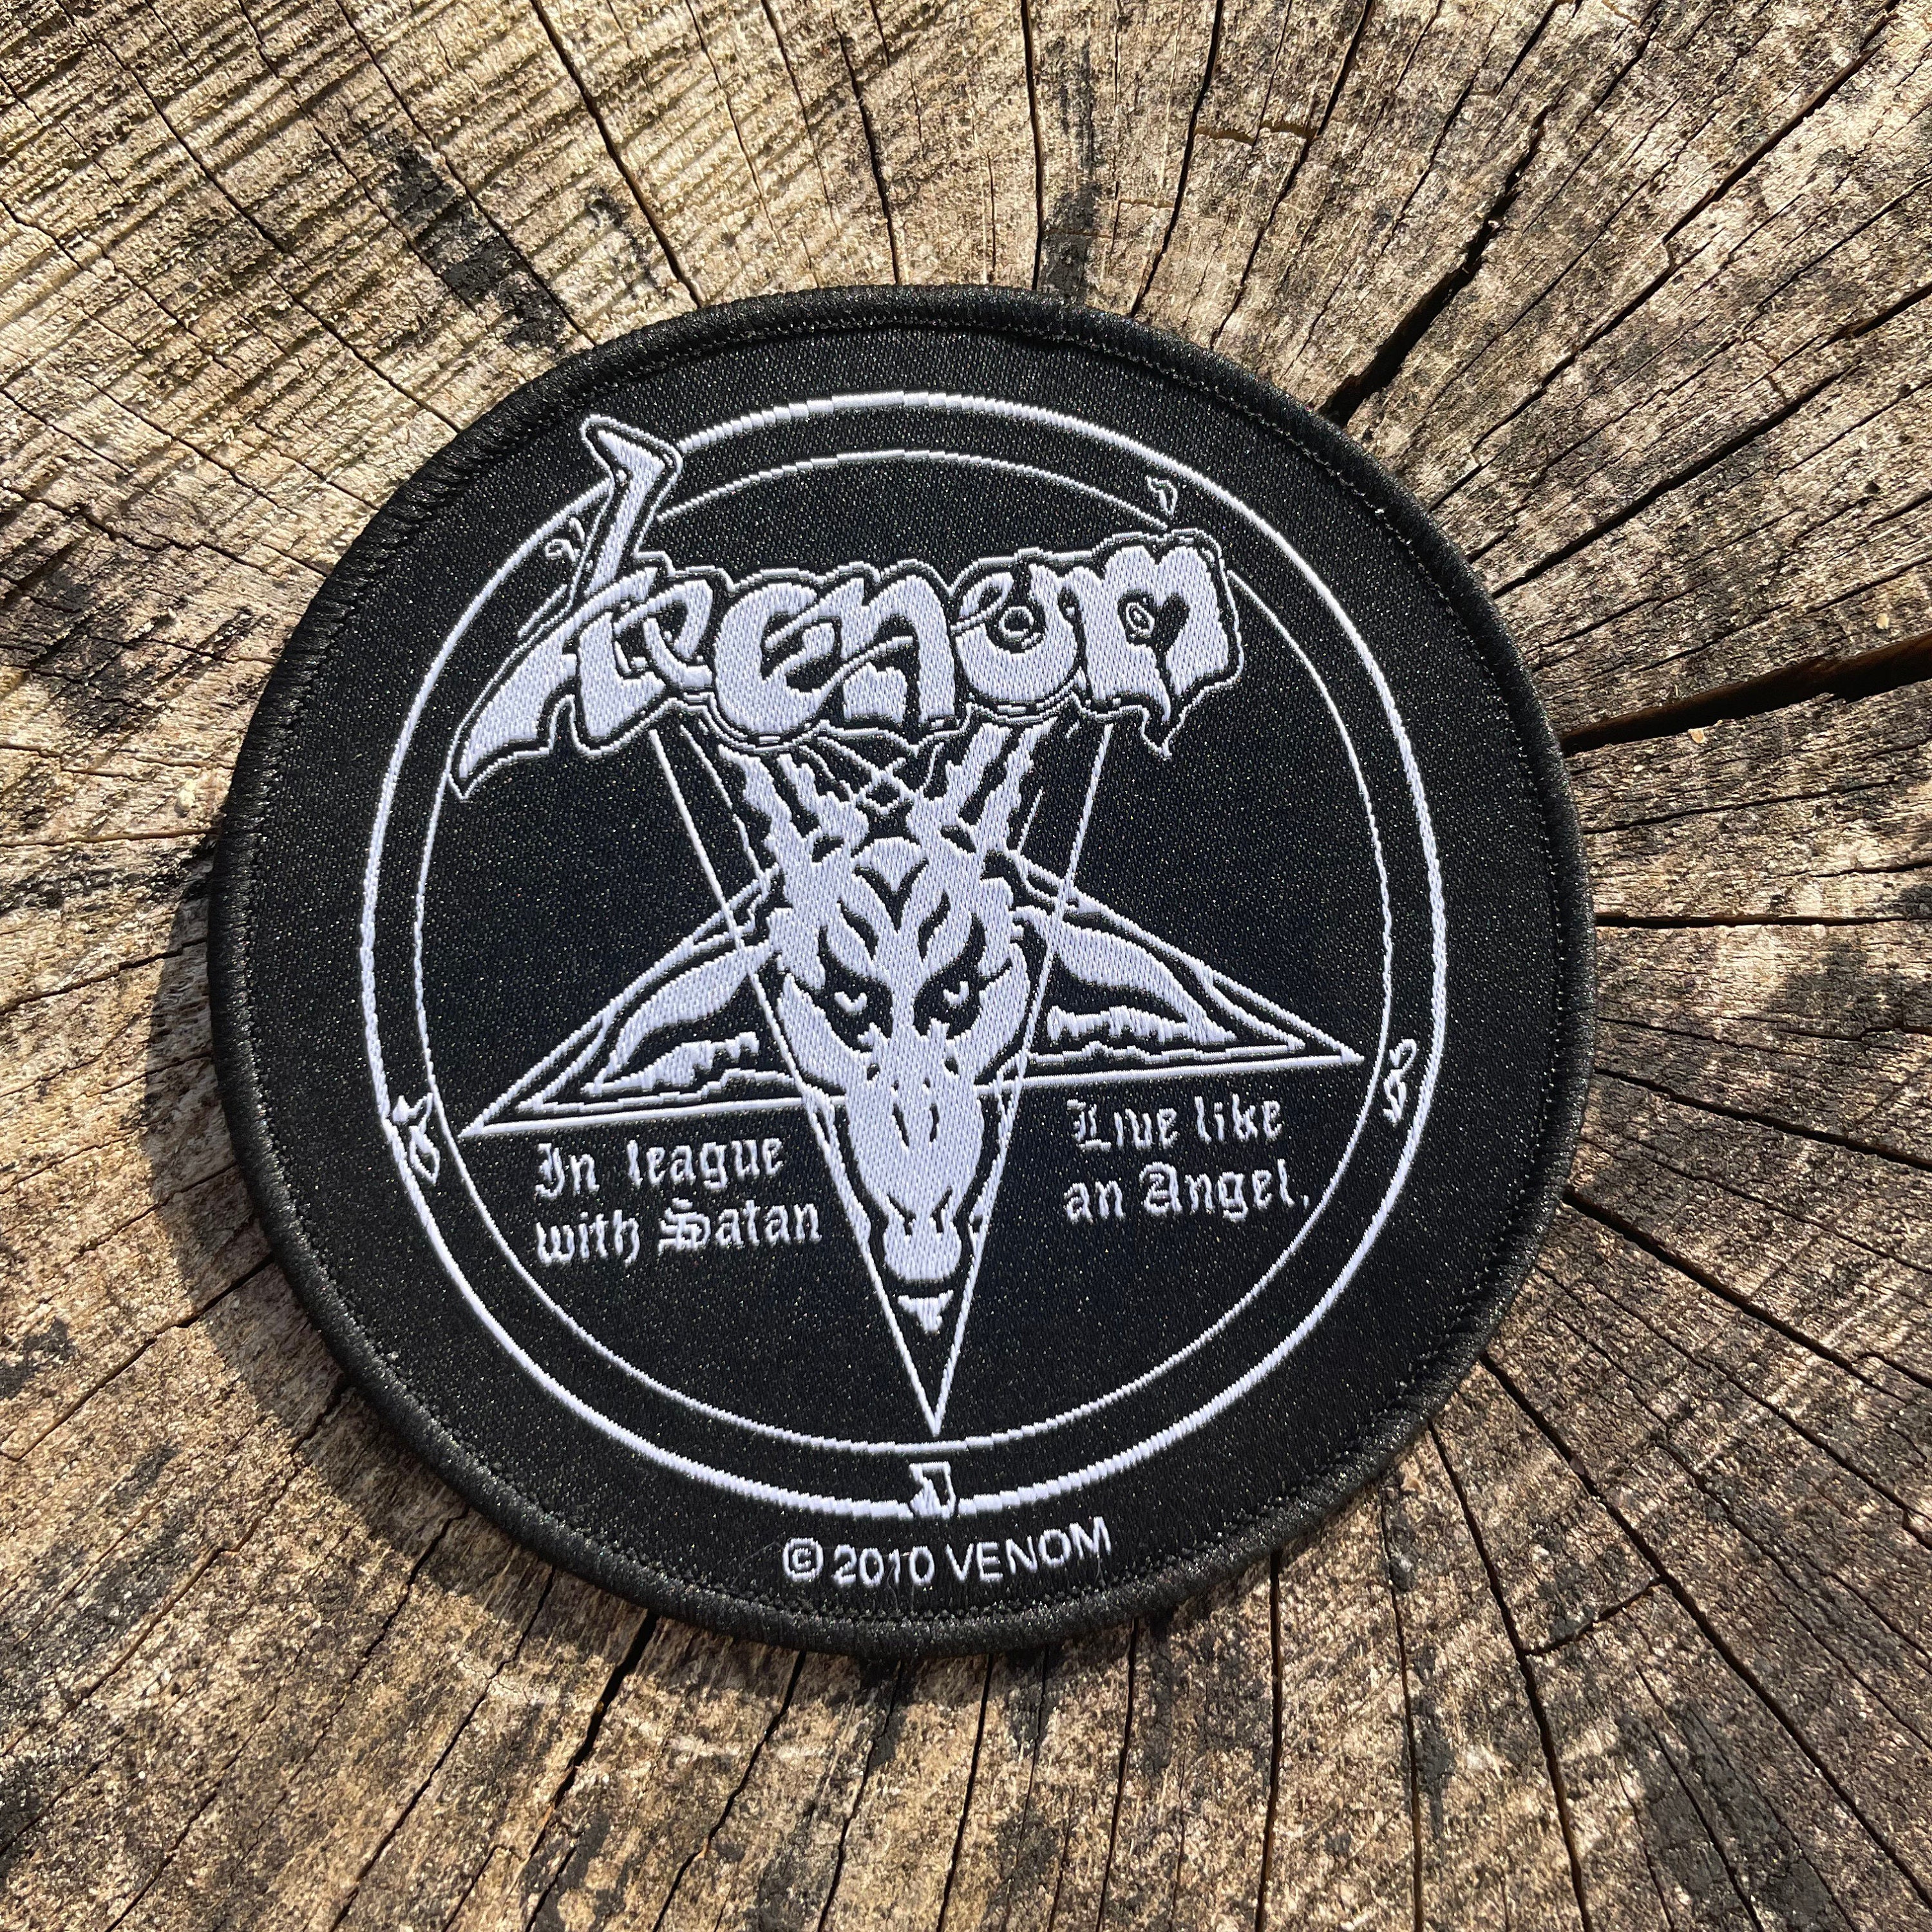 Hell Satanic Goat Embroidered Iron-on / Velcro Sleeve Patch